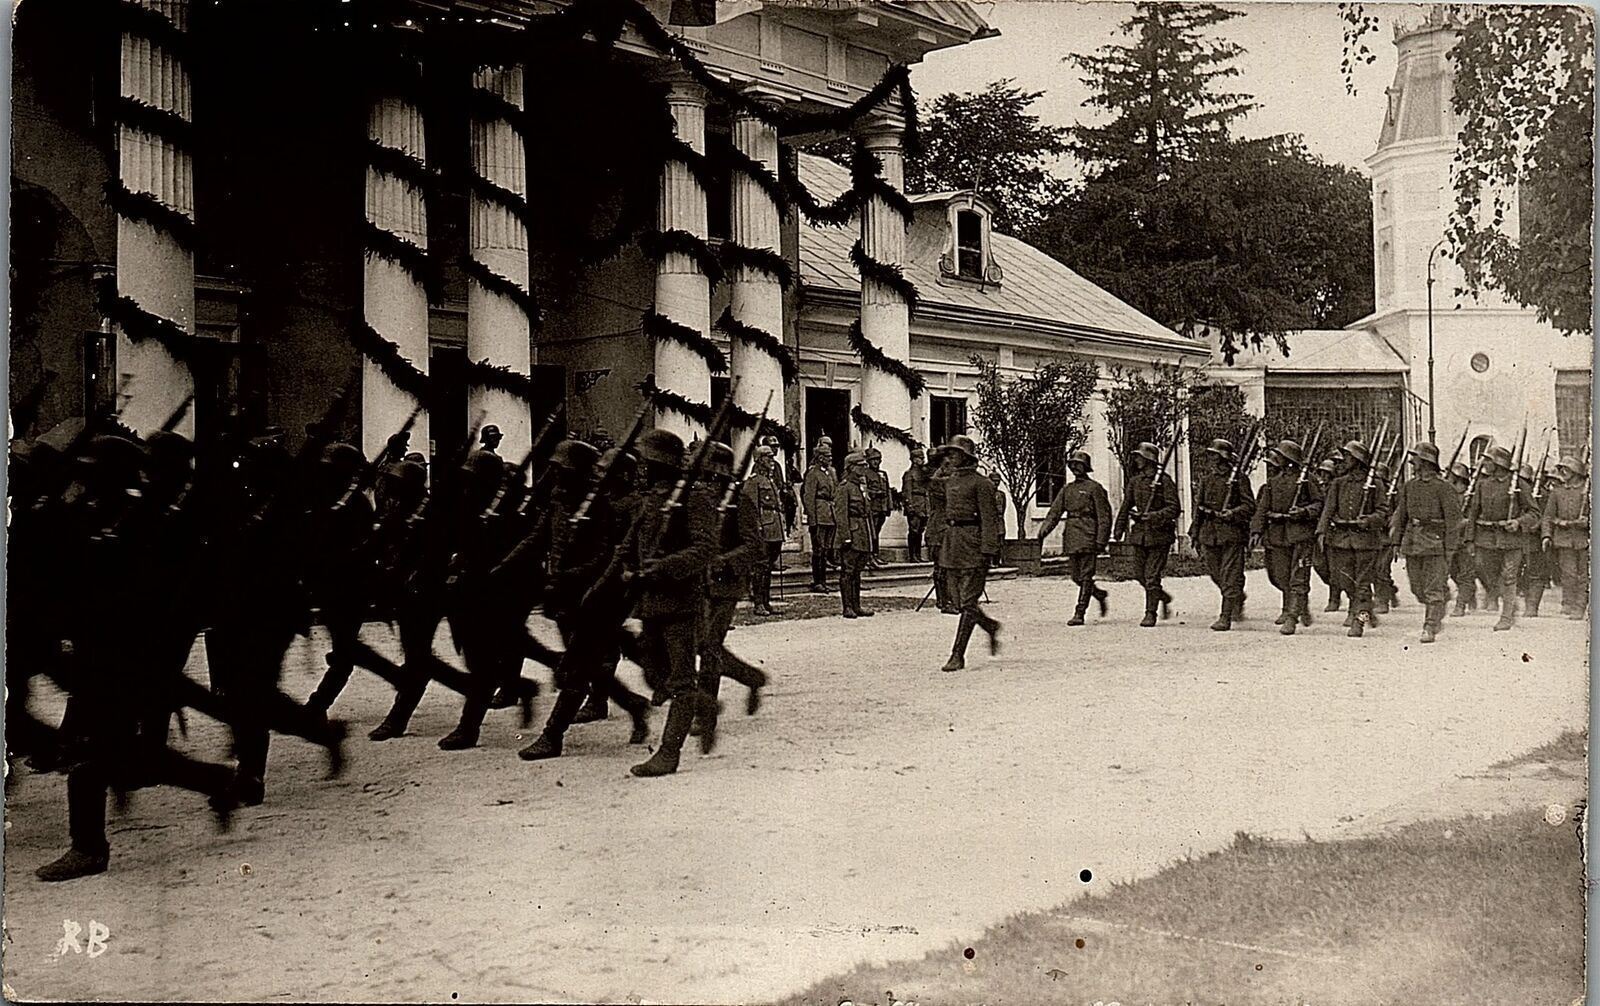 1917 GERMAN SOLDIERS MARCHING INTO A CITY SEPT 6 1917 REAL PHOTO POSTCARD 29-143